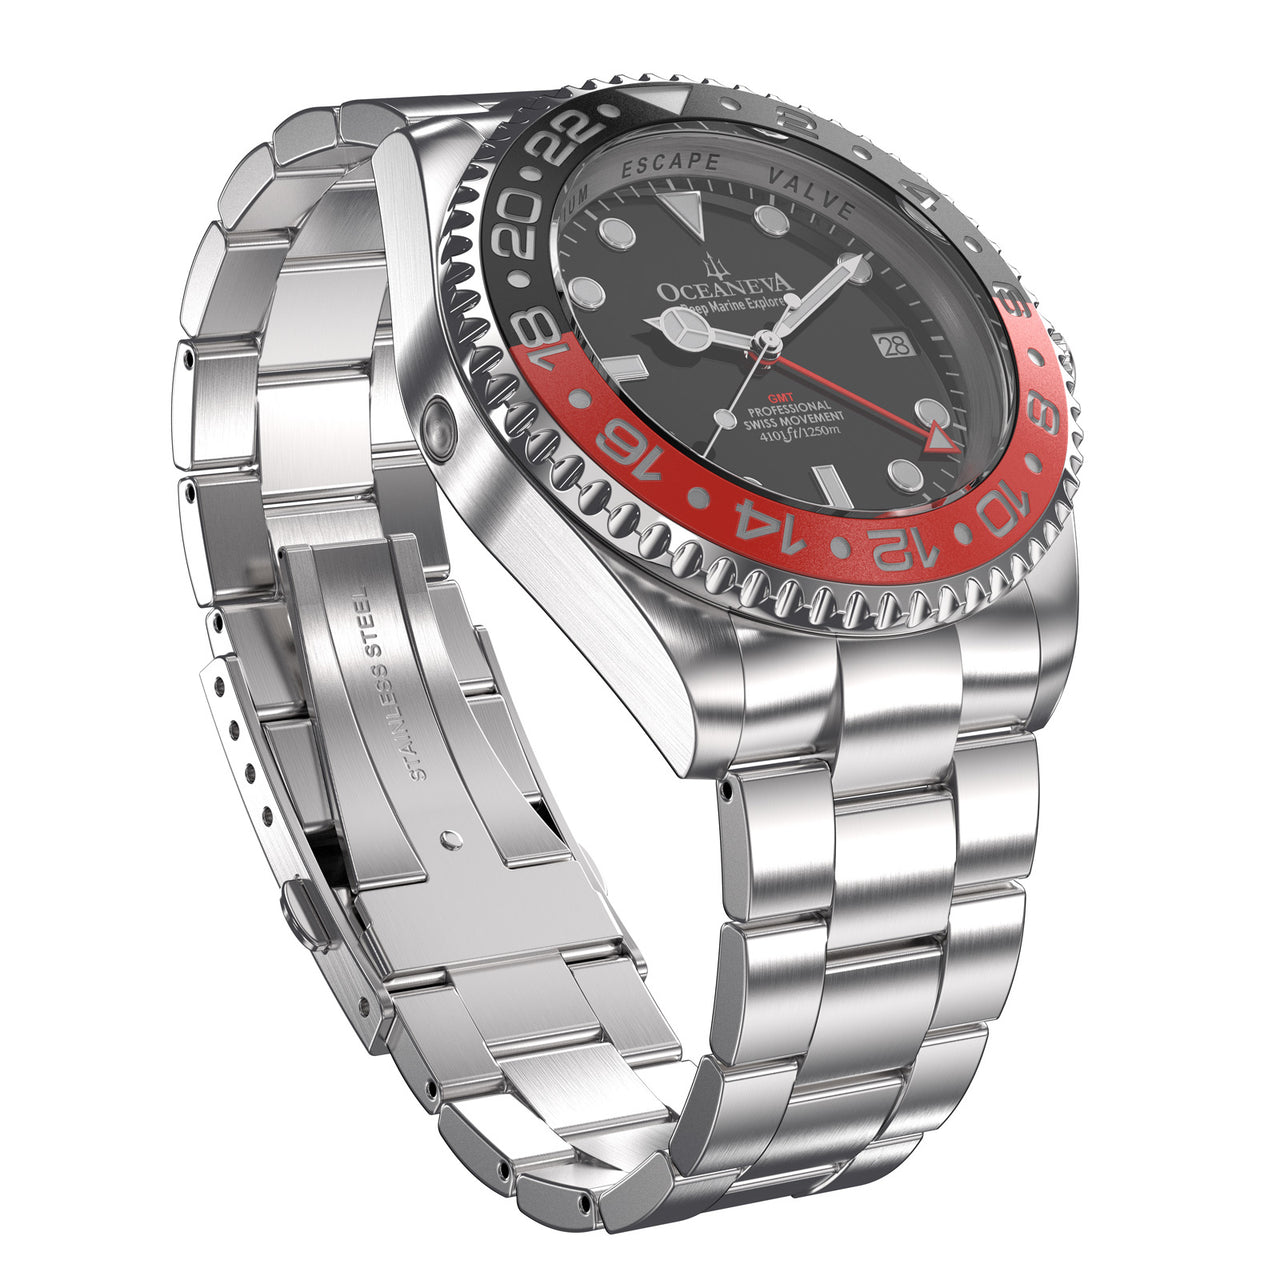 Oceaneva 1250M GMT Dive Watch Red And Black Front Picture Slight Right Slant View